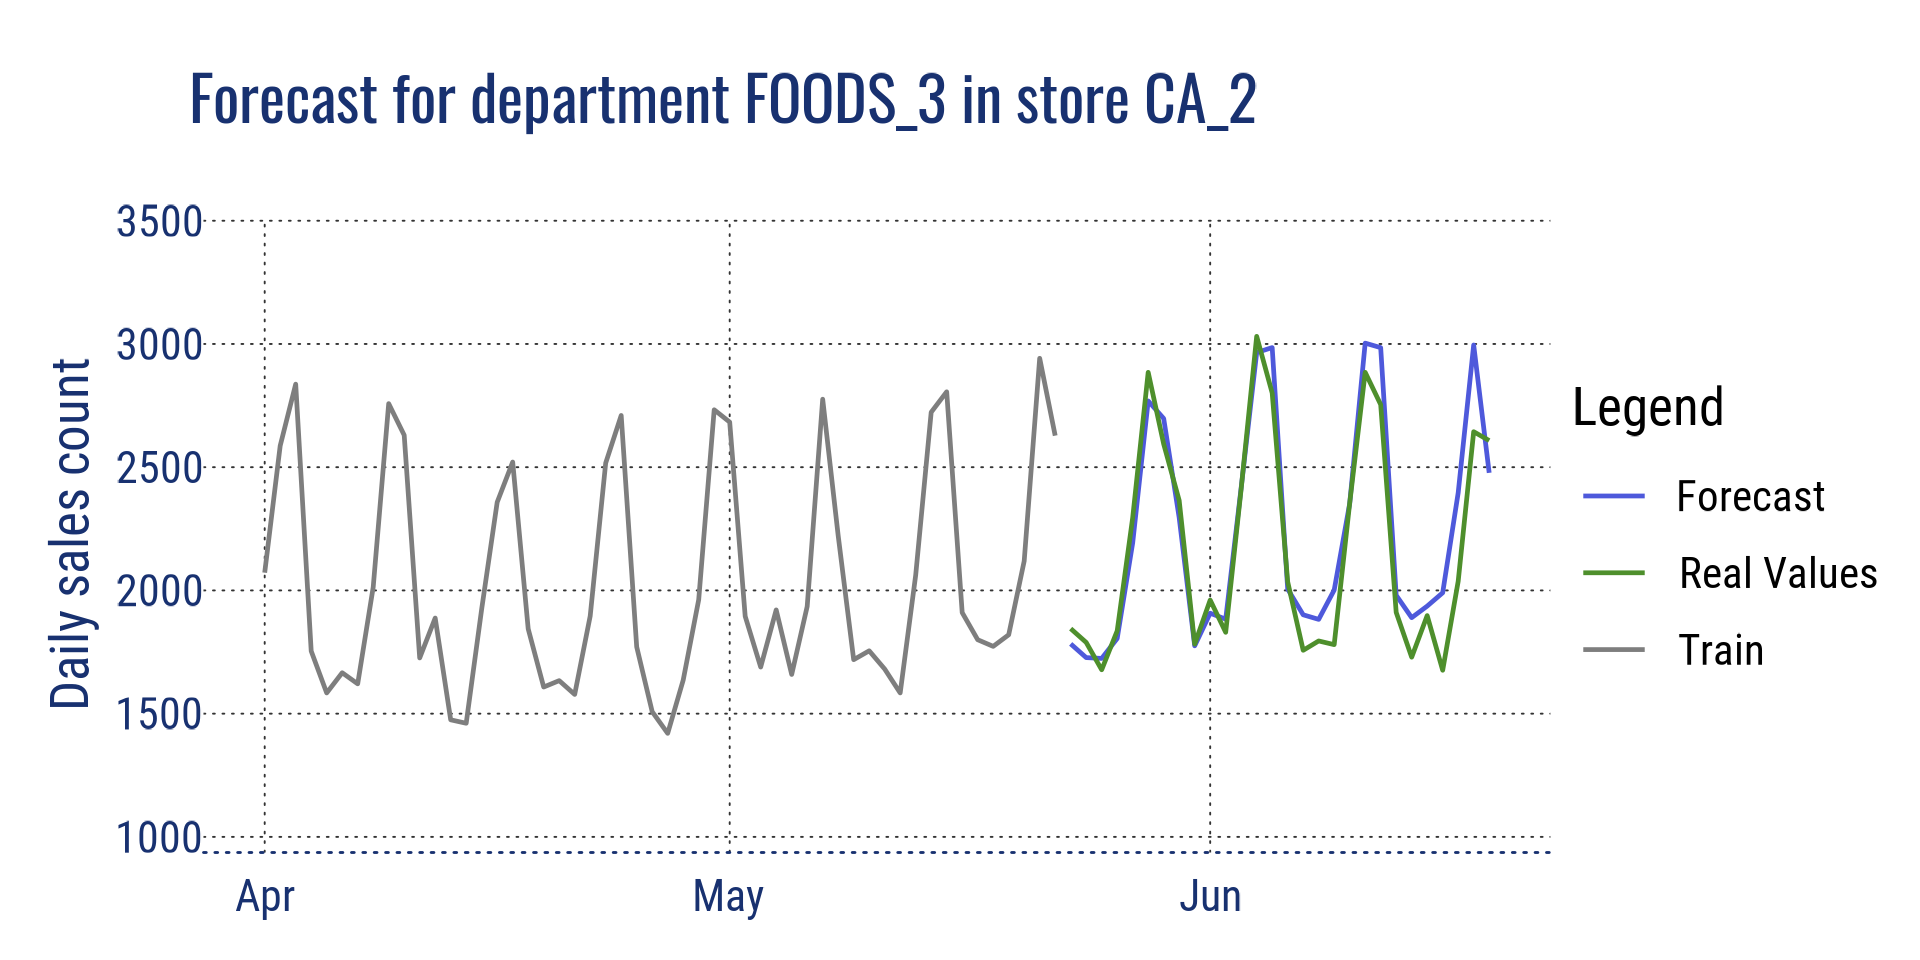 Forecast for department FOODS_3 in CA_2